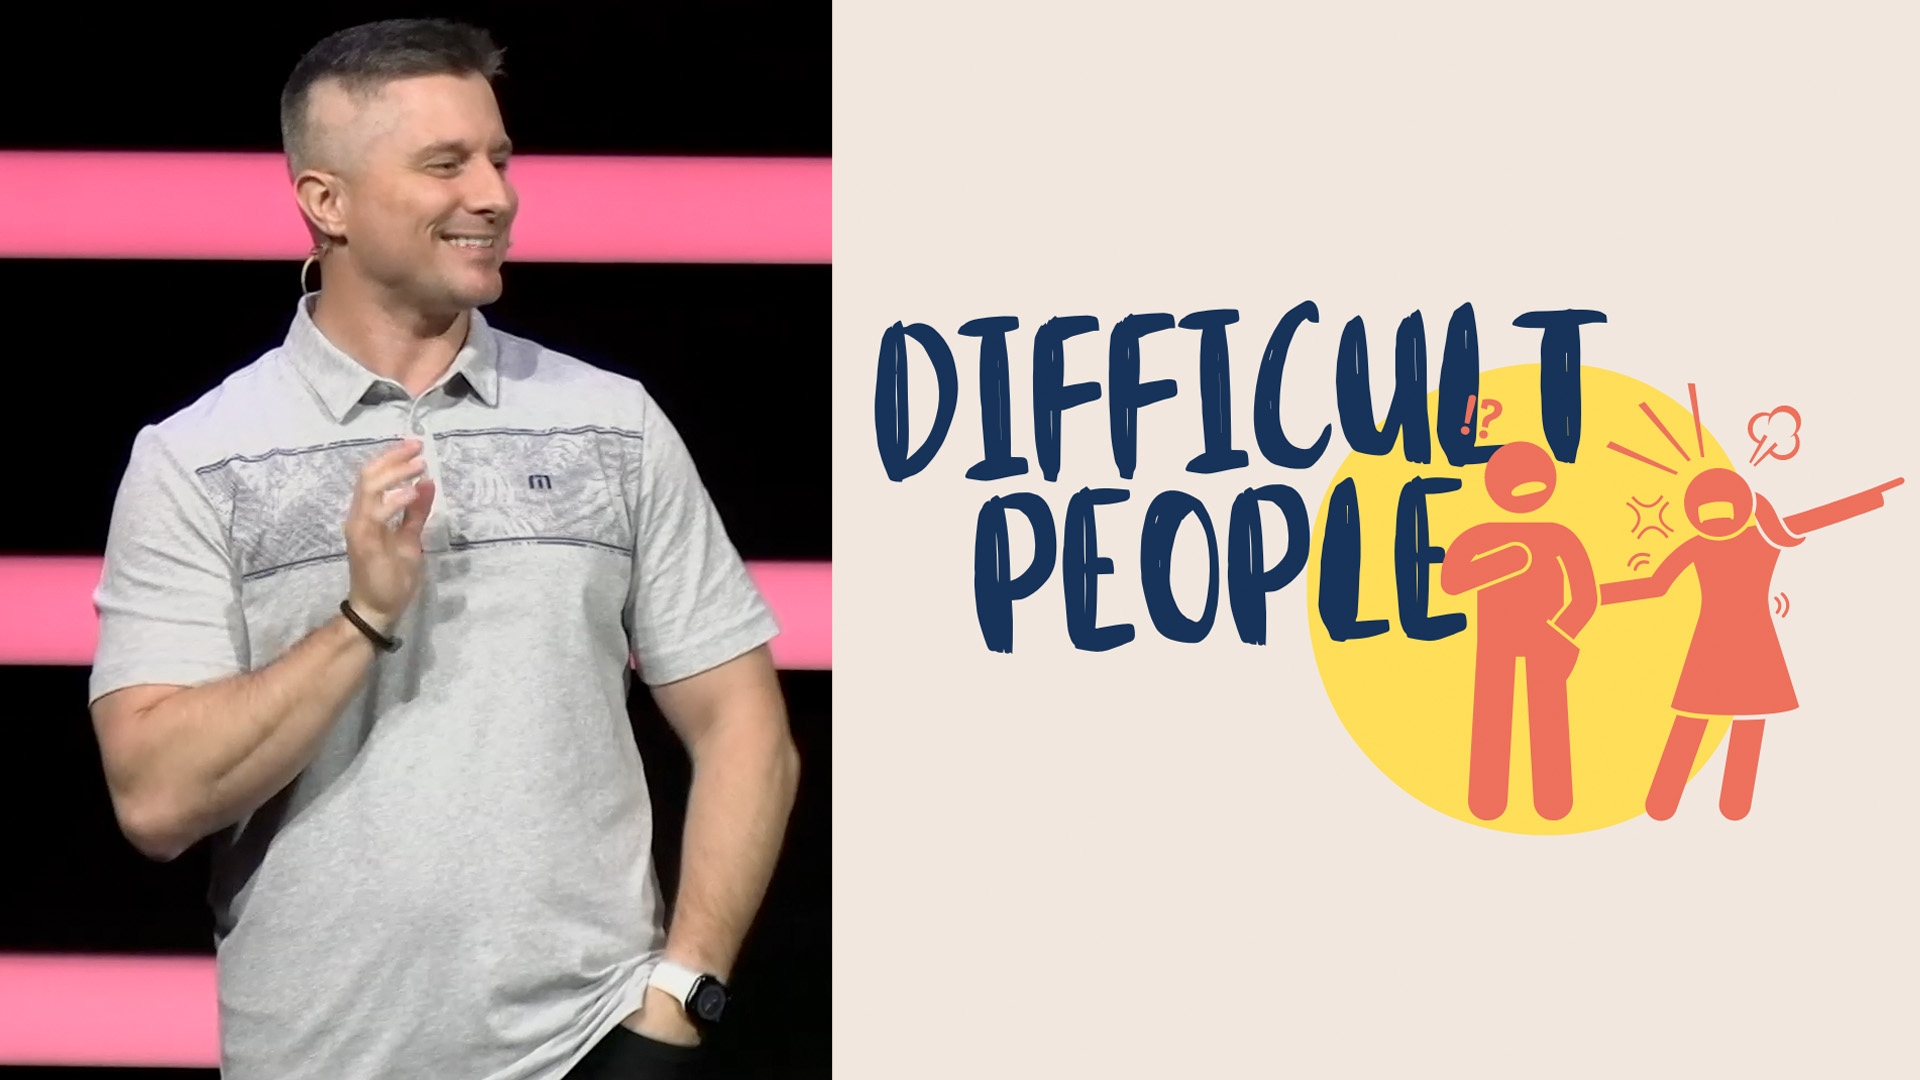 Difficult People - Week Two - The Overly Needy Person